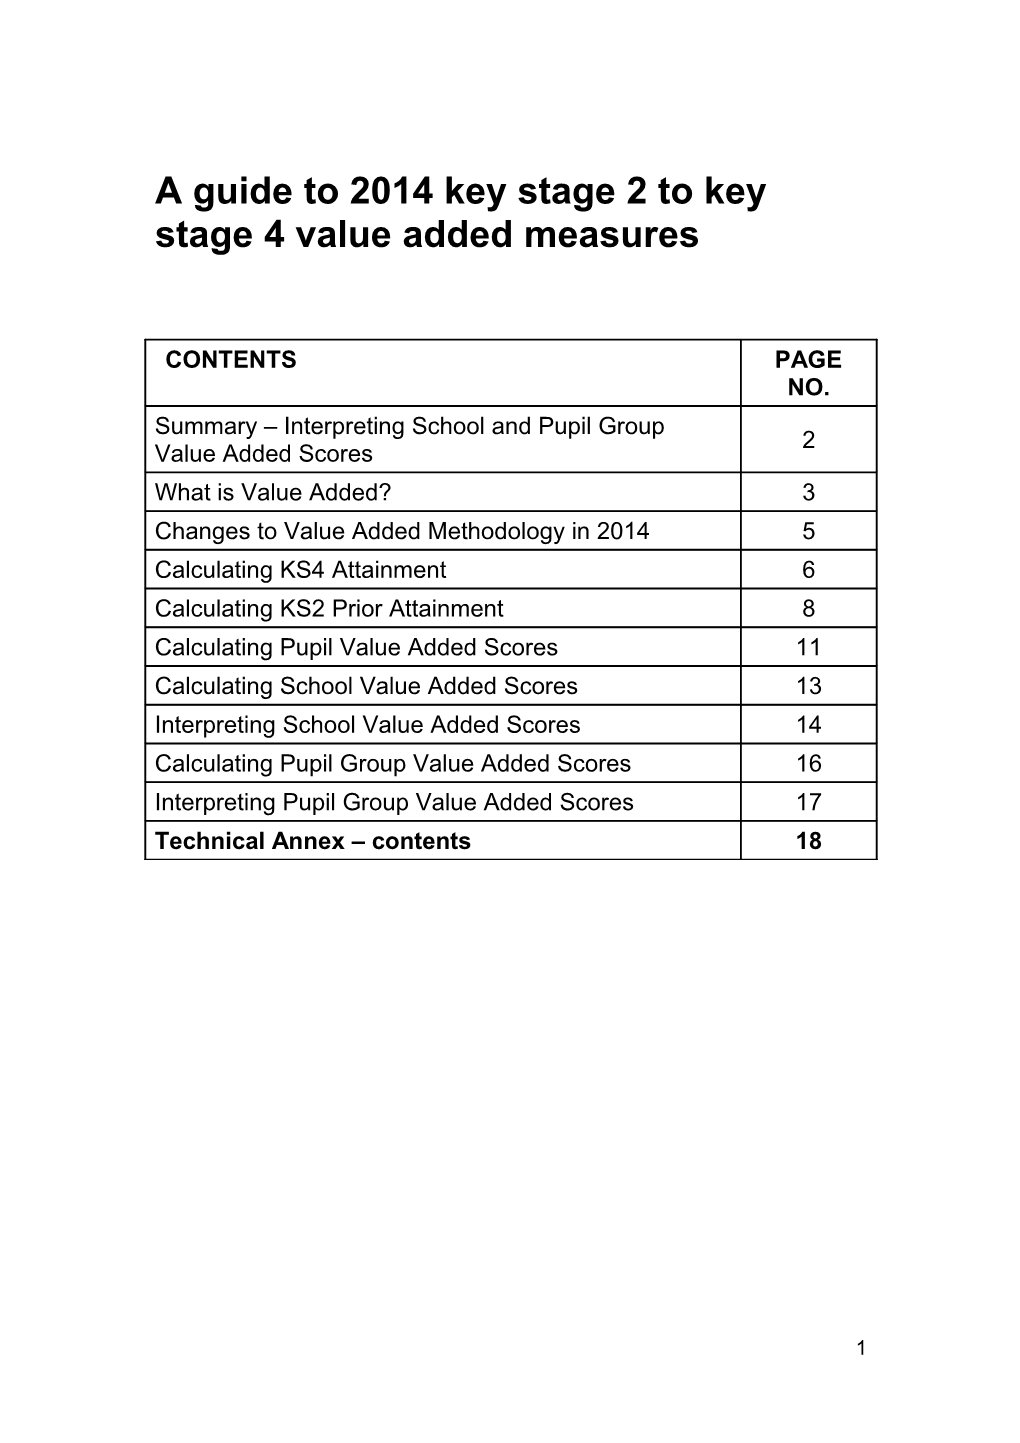 A Guide to 2014 Key Stage 2 to Key Stage 4Value Added Measures